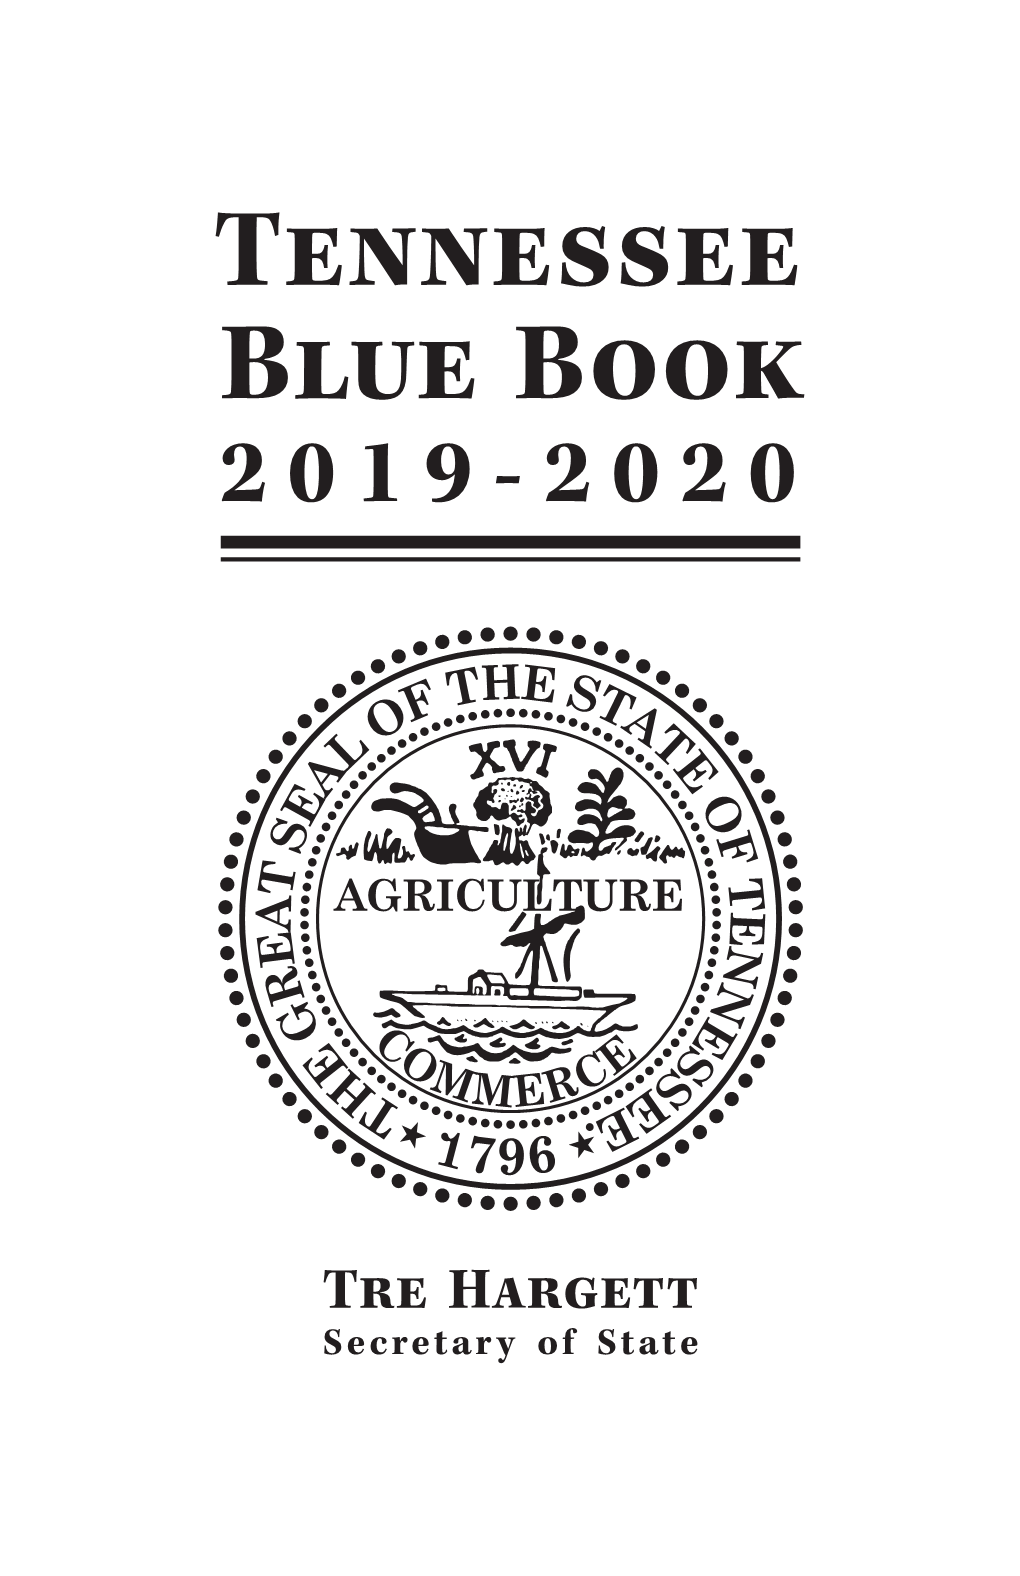 Tennessee Blue Book 2019-2020